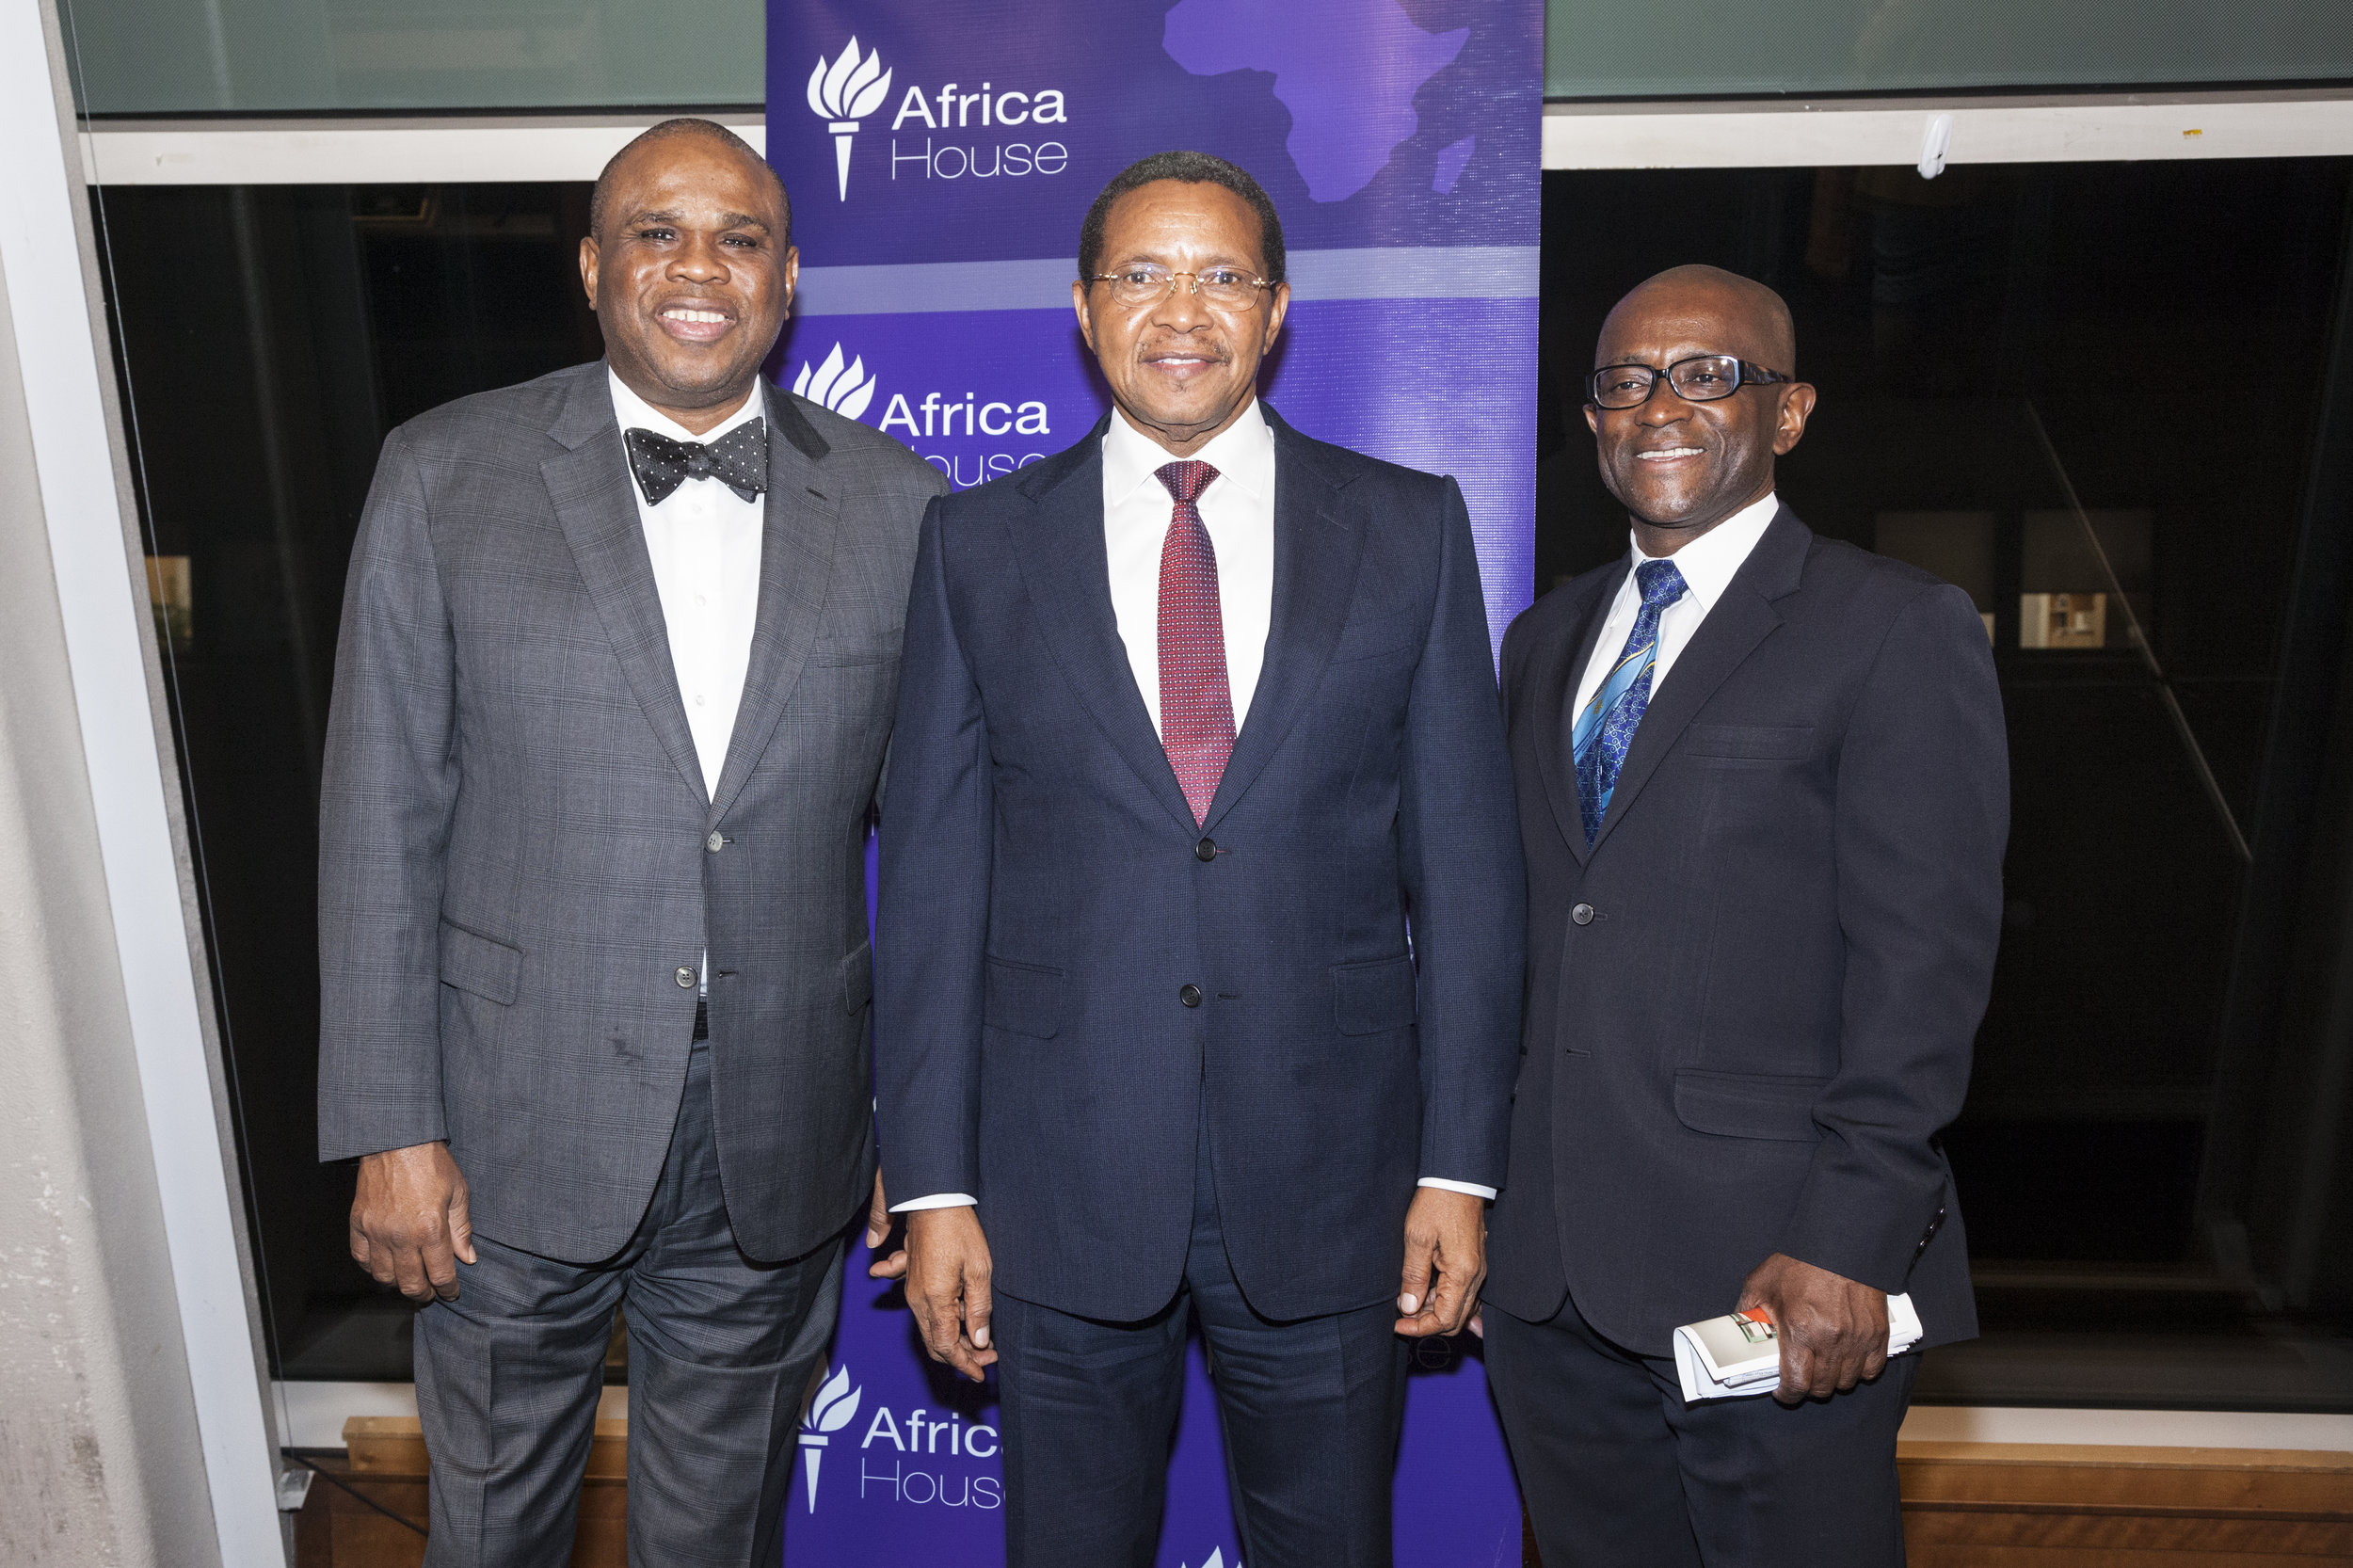 Copy of 2018 Gala Honorees H.E. Dr. Jakaya M. Kikwete, Former President of the United Republic of Tanzania, and Dr. Benedict Oramah, President of the African Export–Import Bank (Afreximbank)